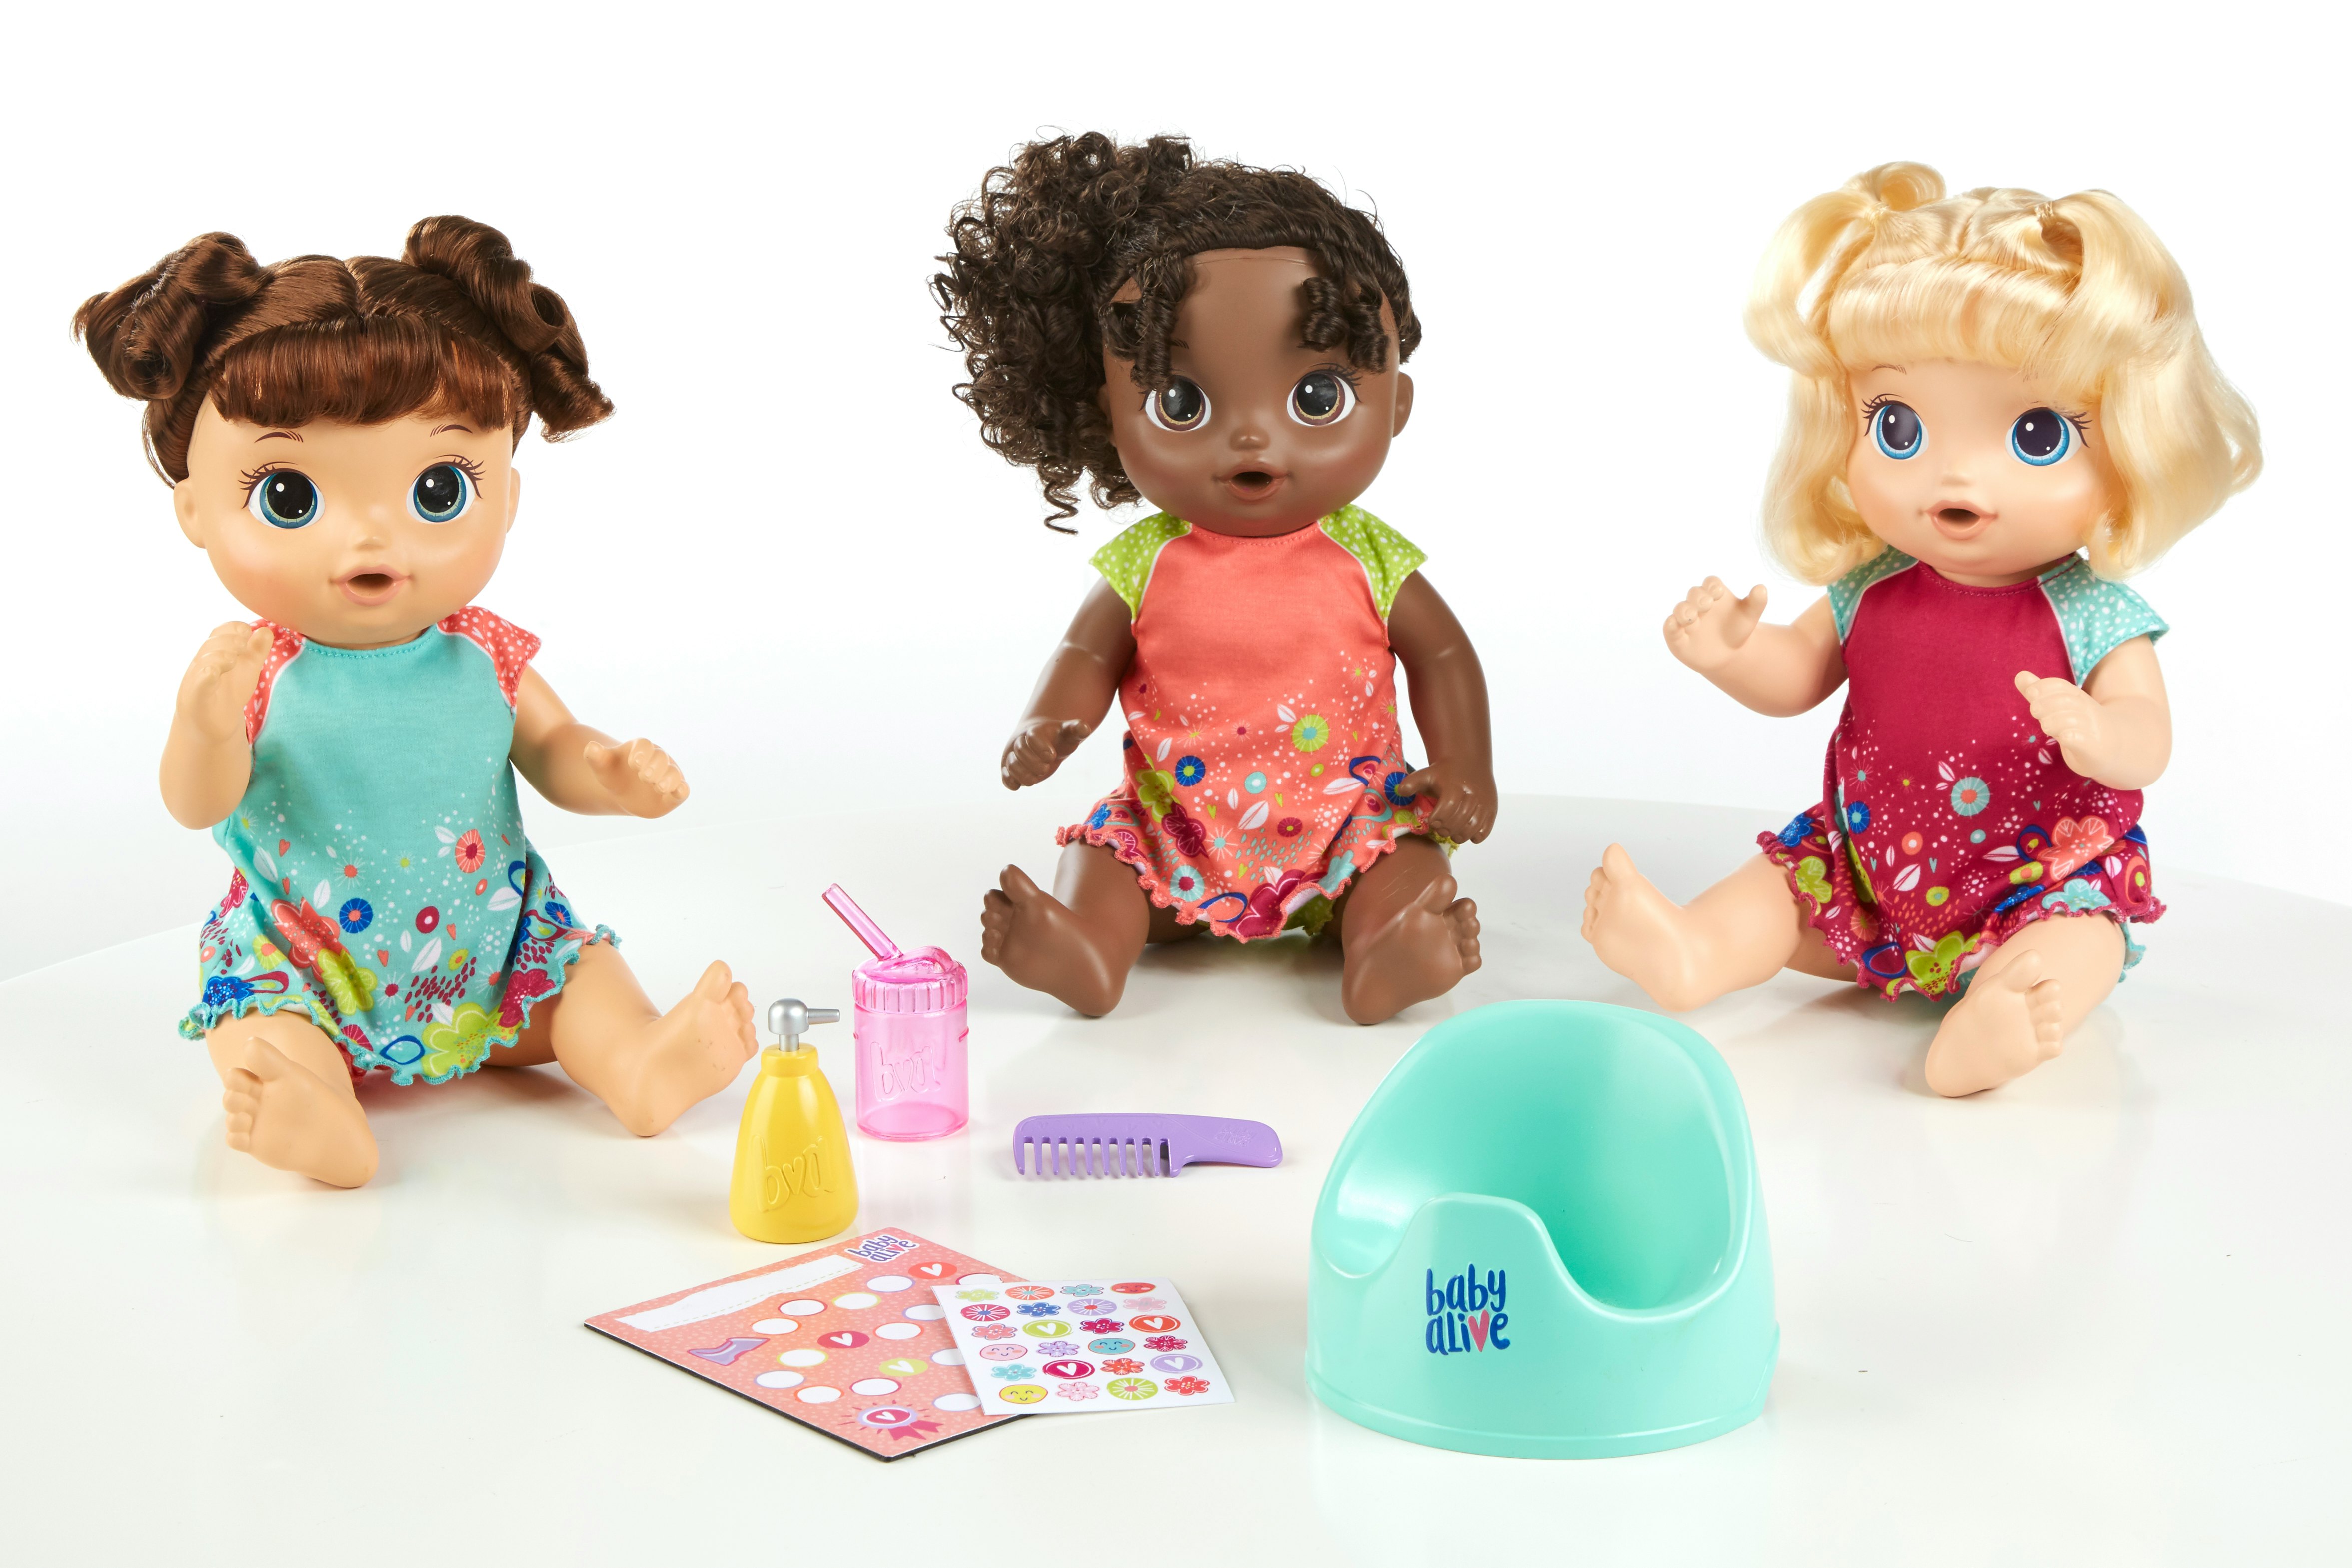 the new baby alive dolls